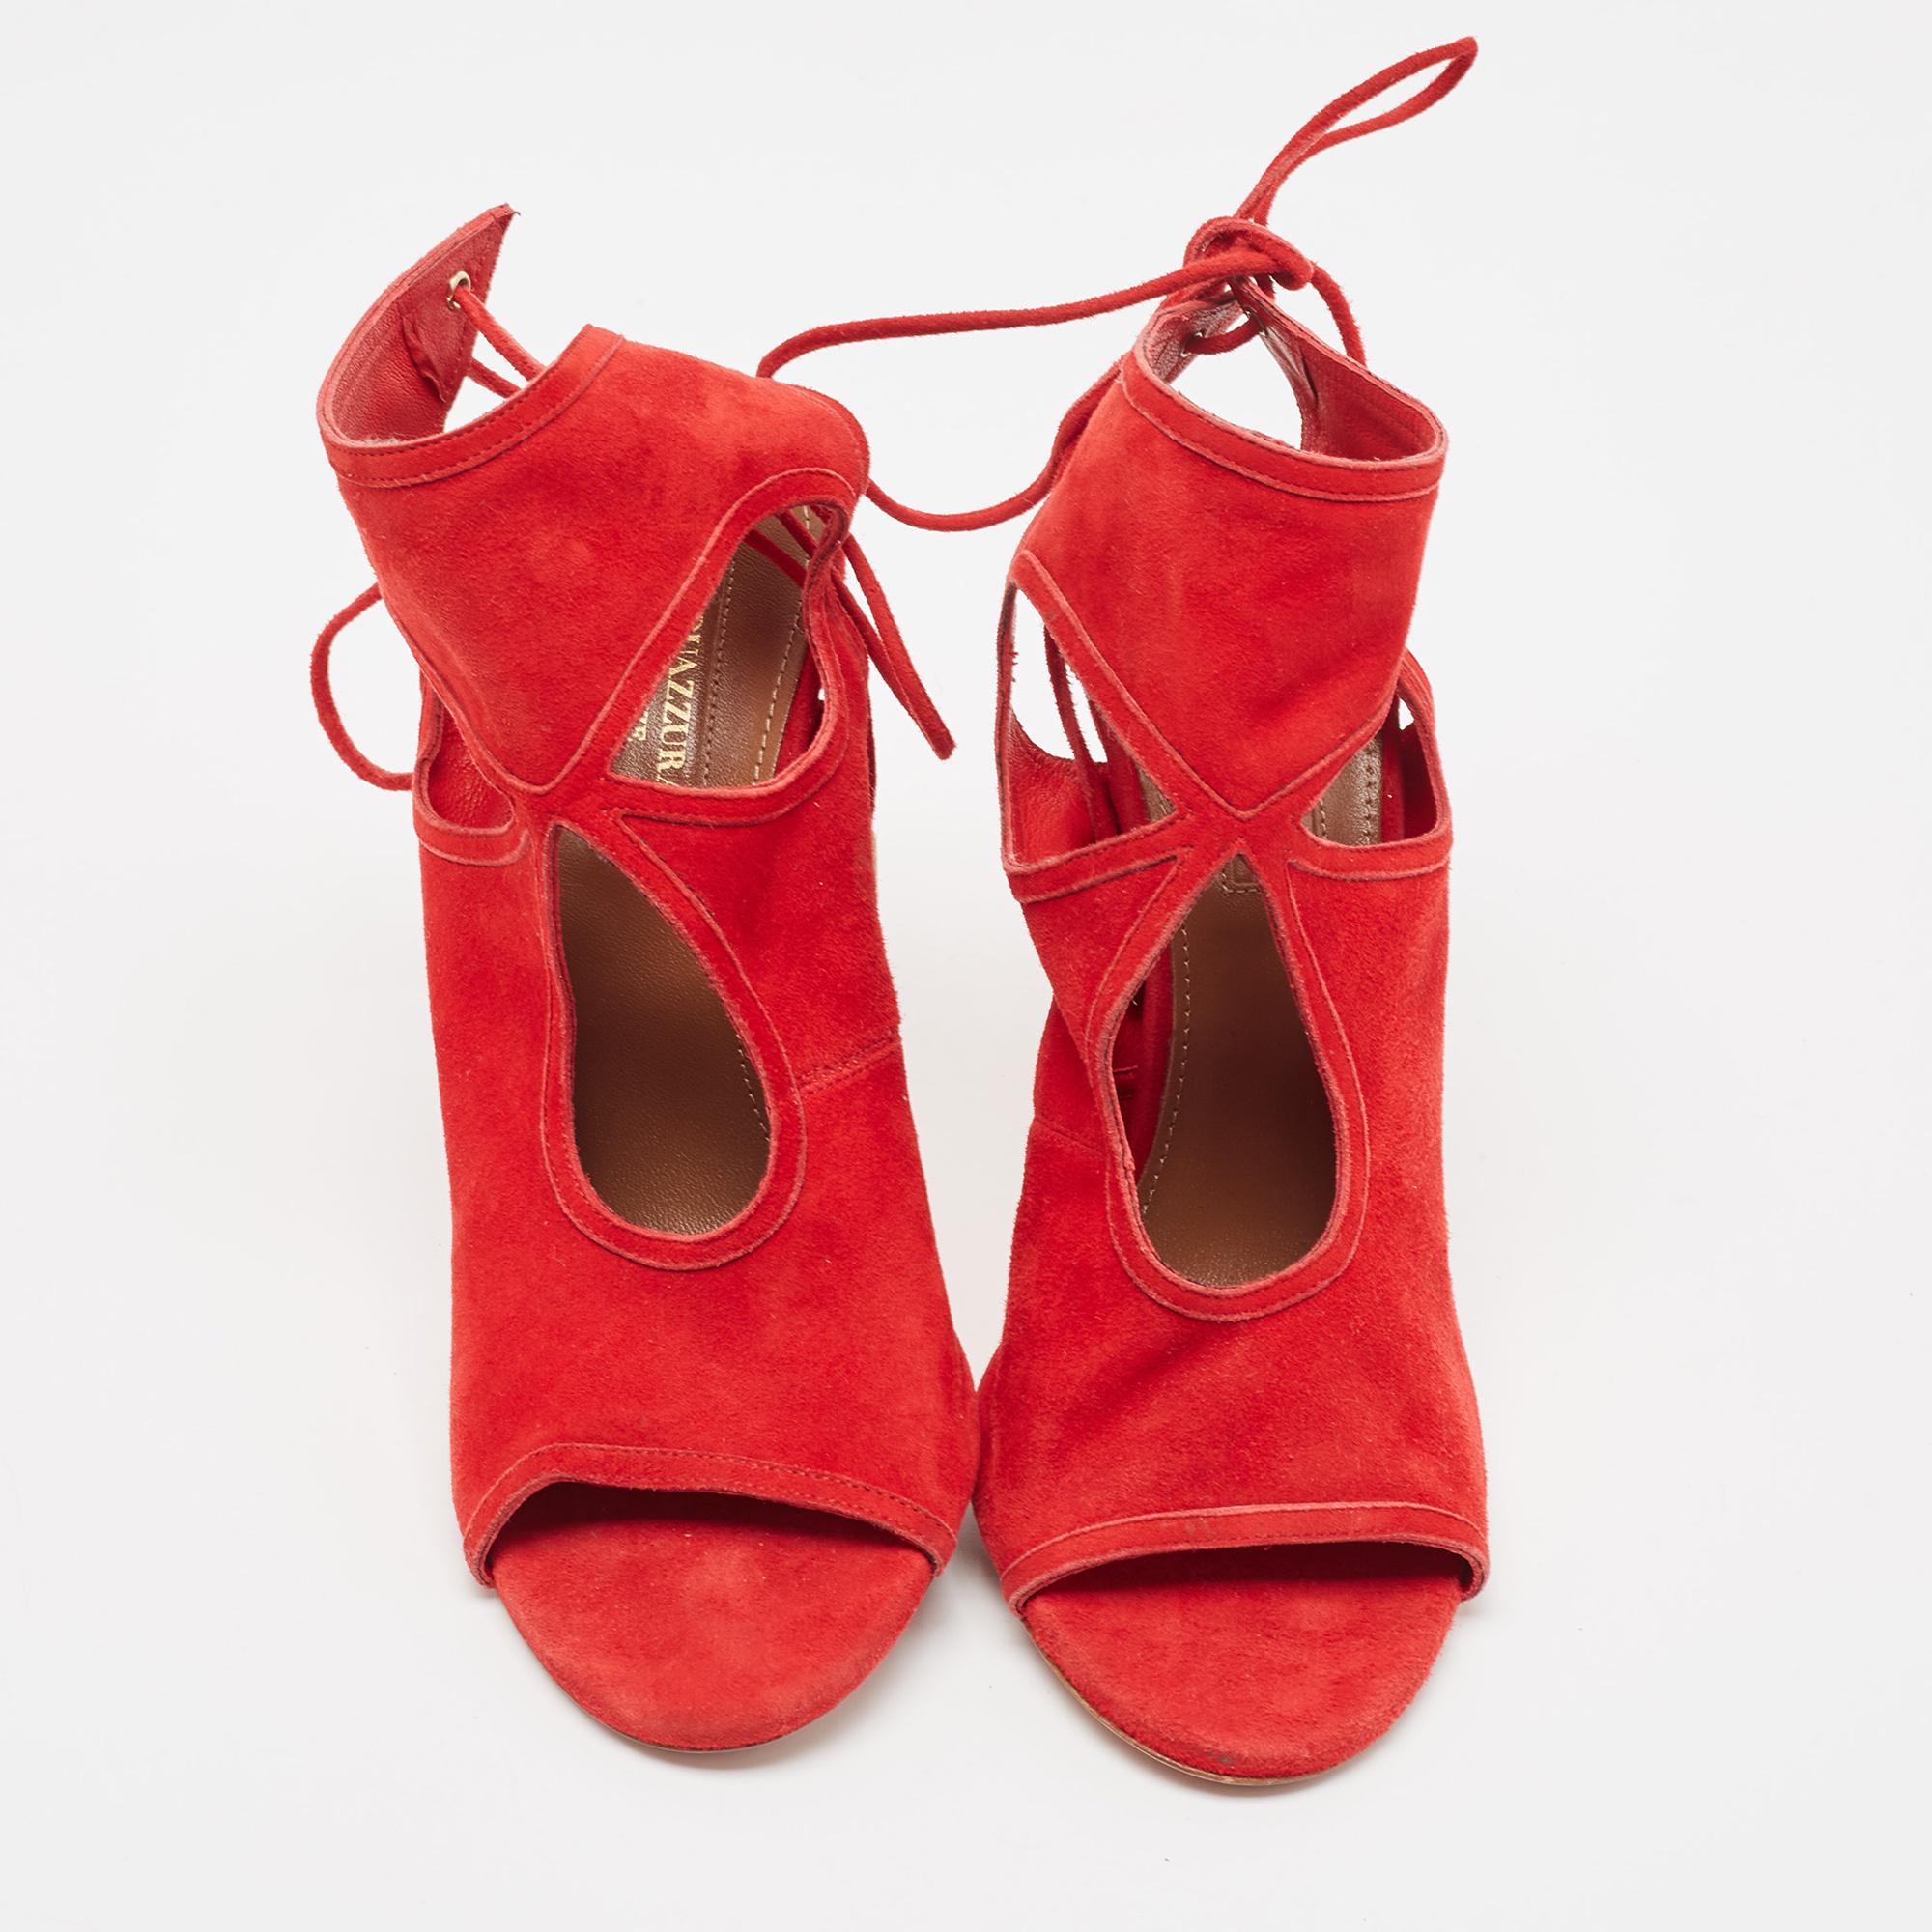 Aquazzura Red Suede Sexy Thing Ankle Strap Sandals Size 37 4